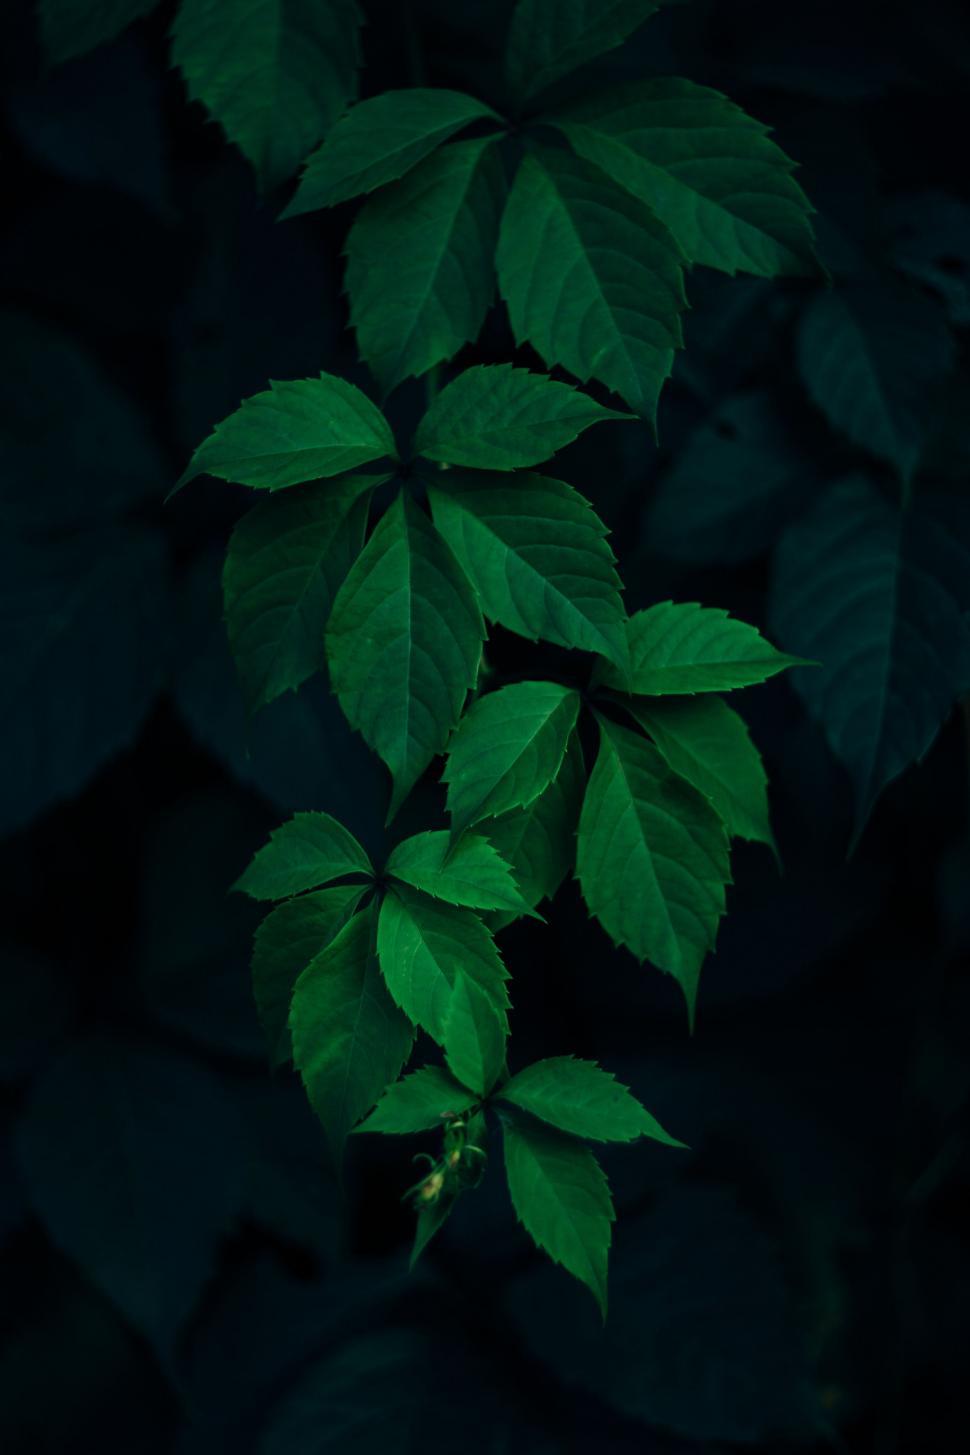 Free Image of Close-Up of a Green Leafy Plant 